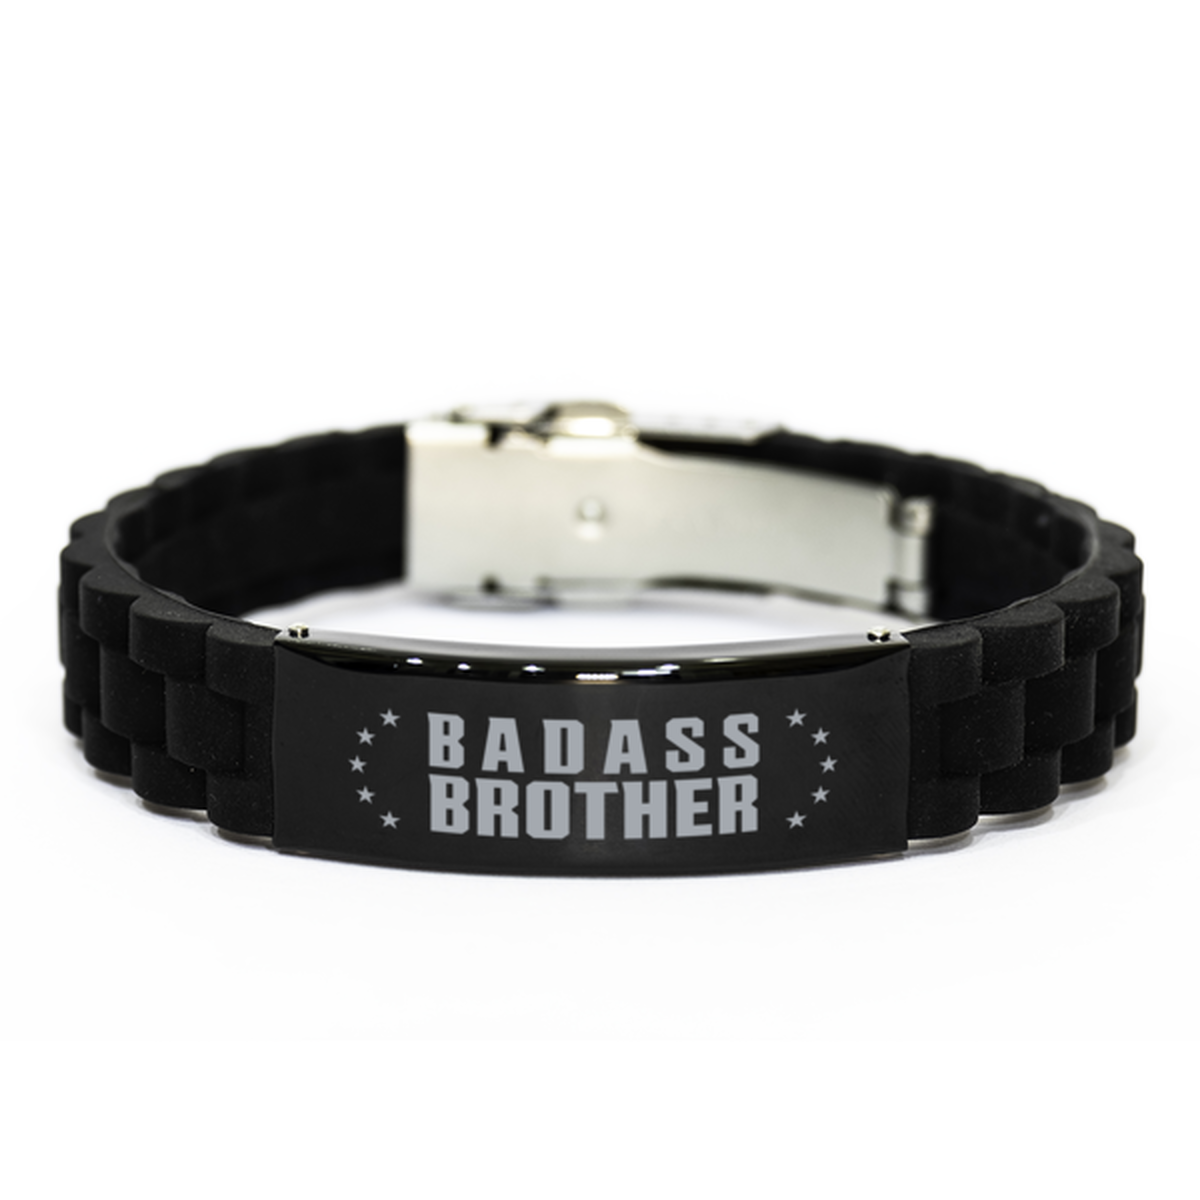 Brother Black Bracelet, Badass Brother, Funny Family Gifts For Brother From Brother Sister